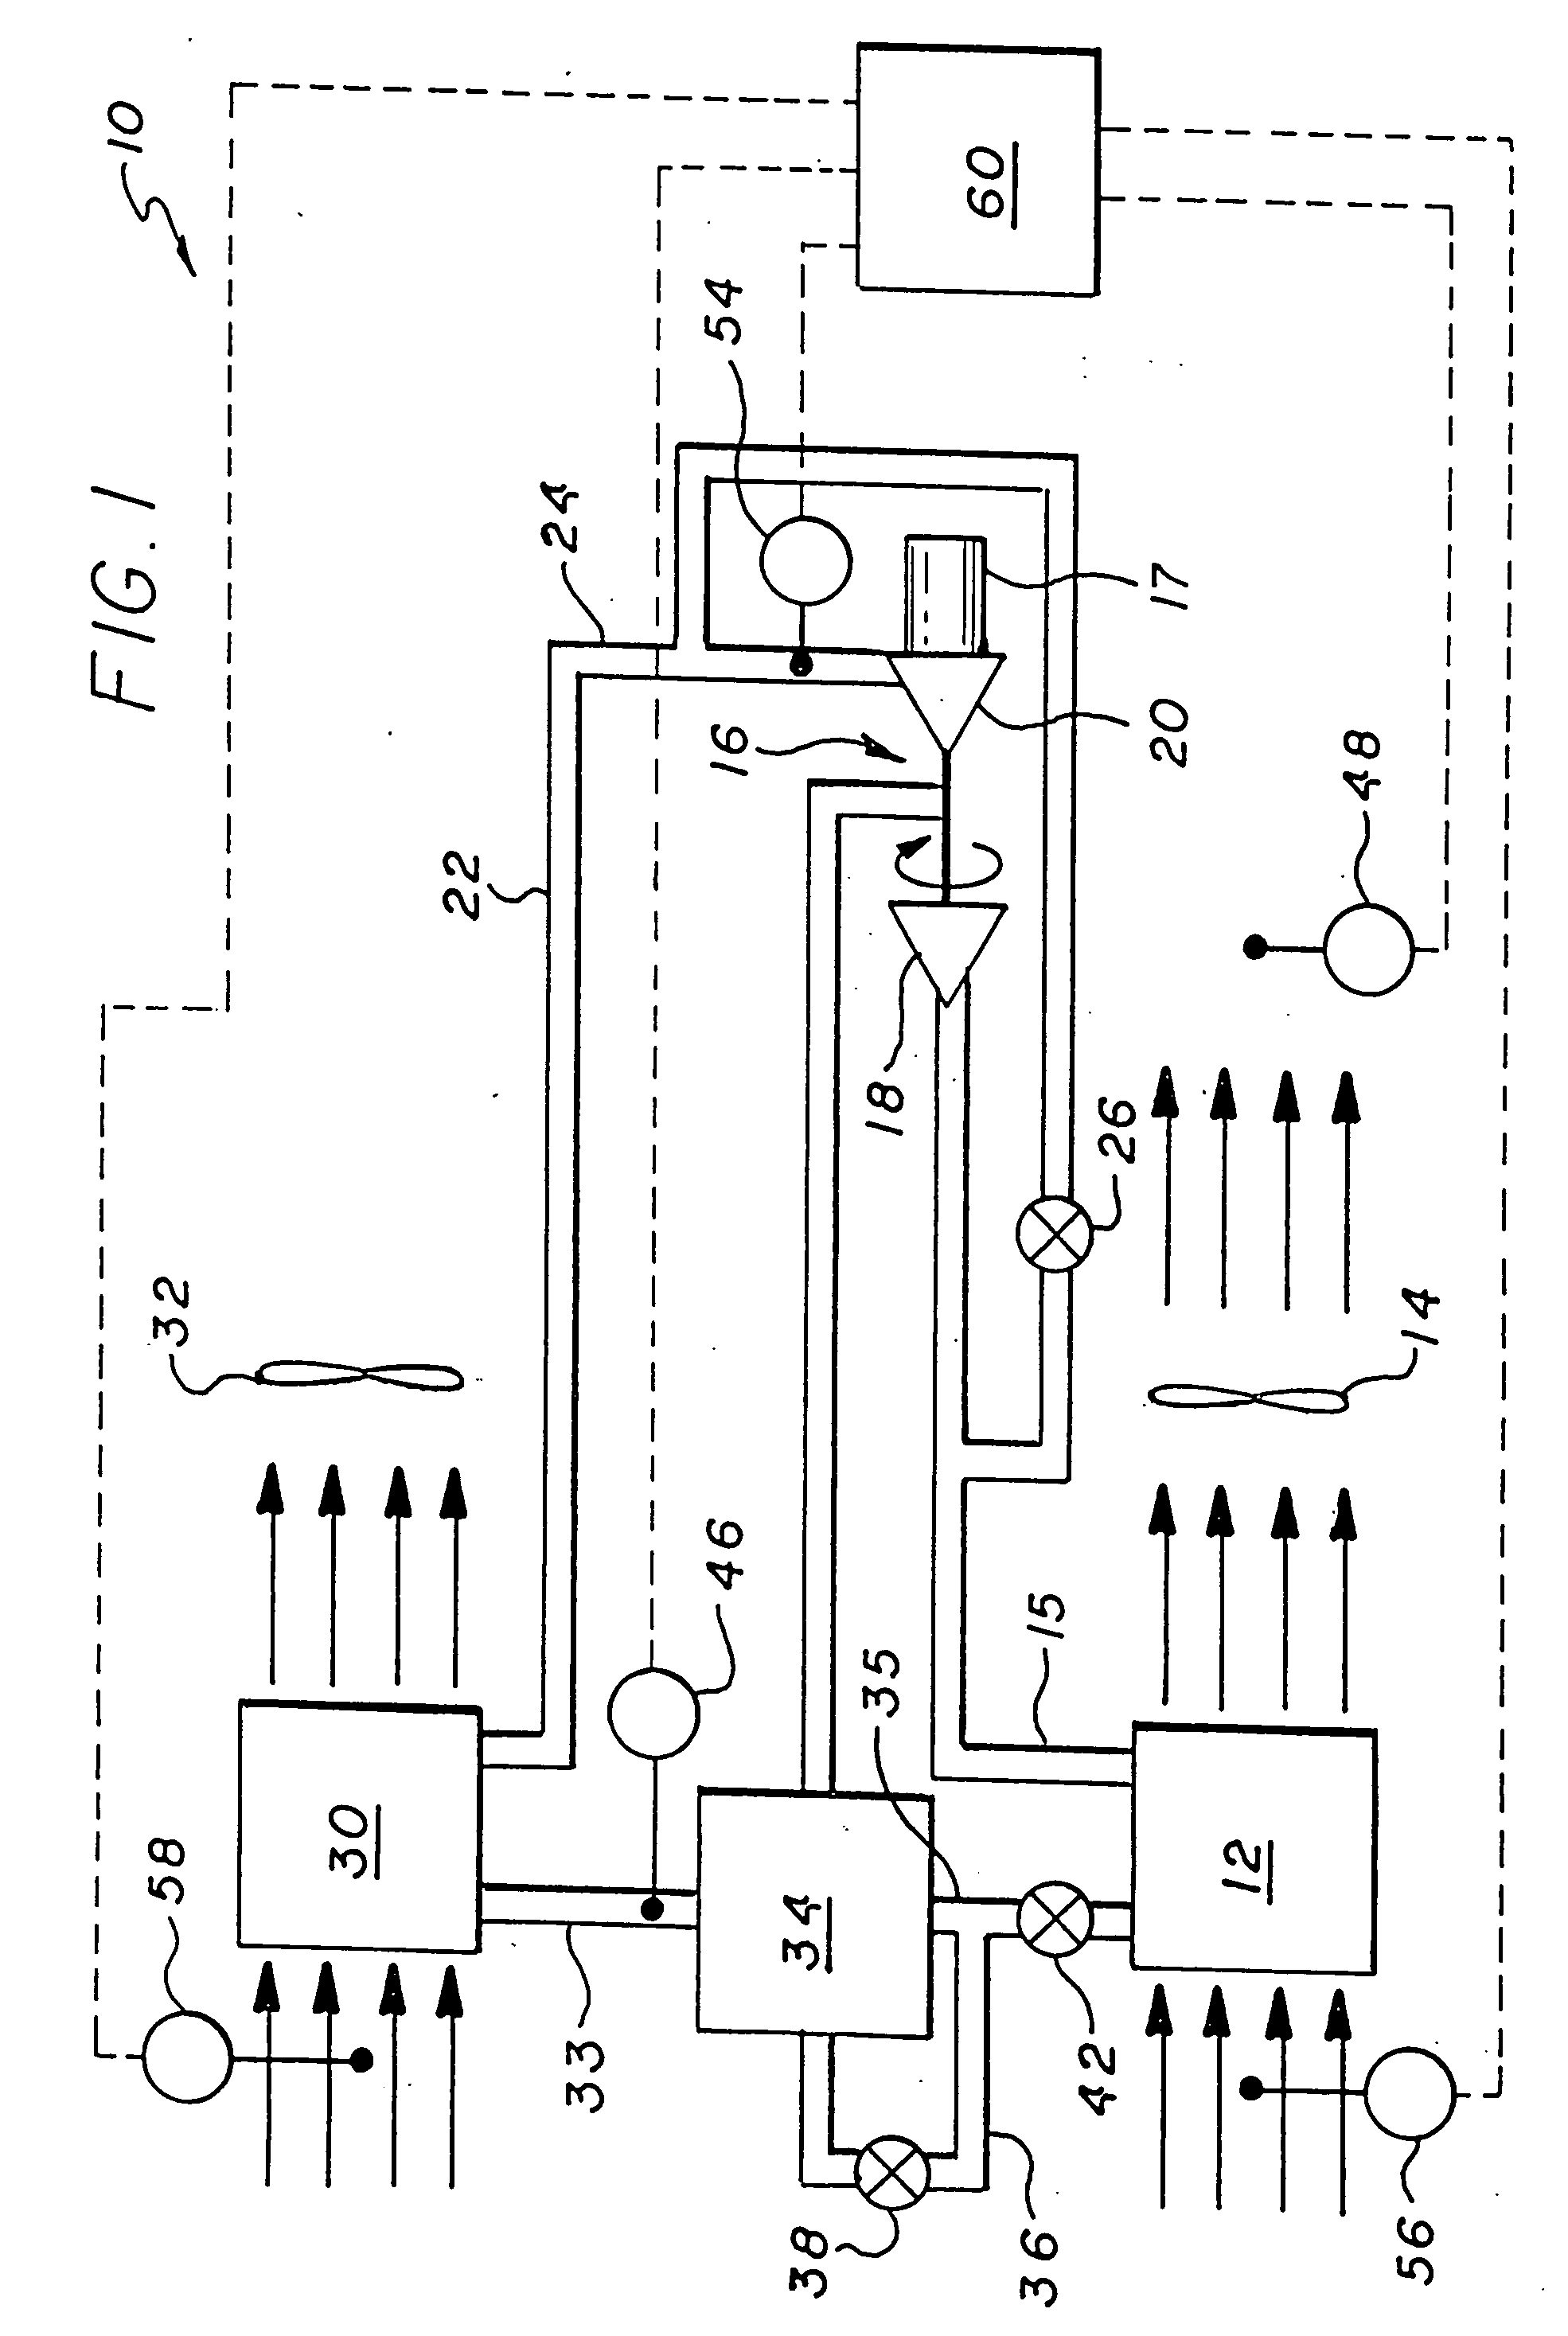 Process for refrigerant charge level detection using a neural net having one output neuron